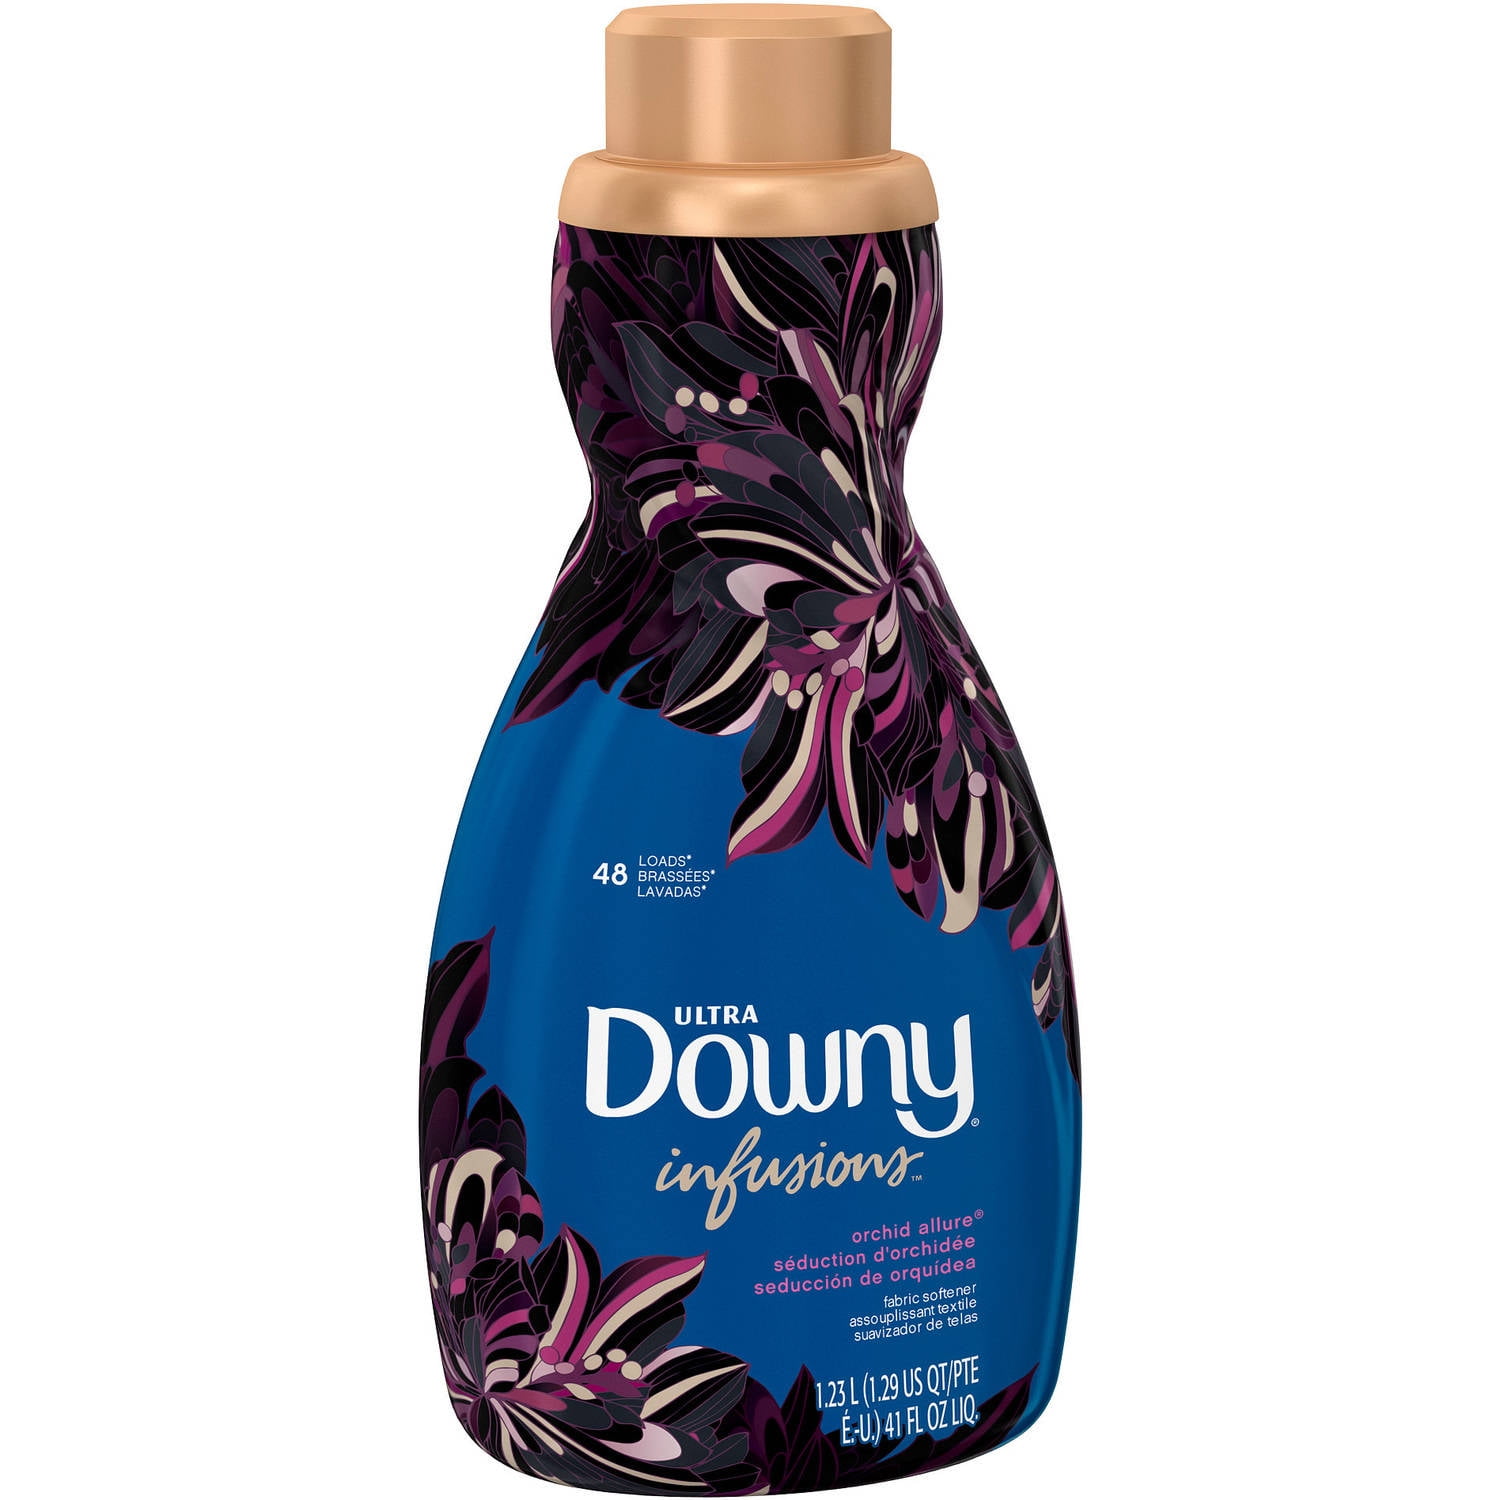 Downy Ultra Infusions Orchid Allure Liquid Fabric Softener 48 ...